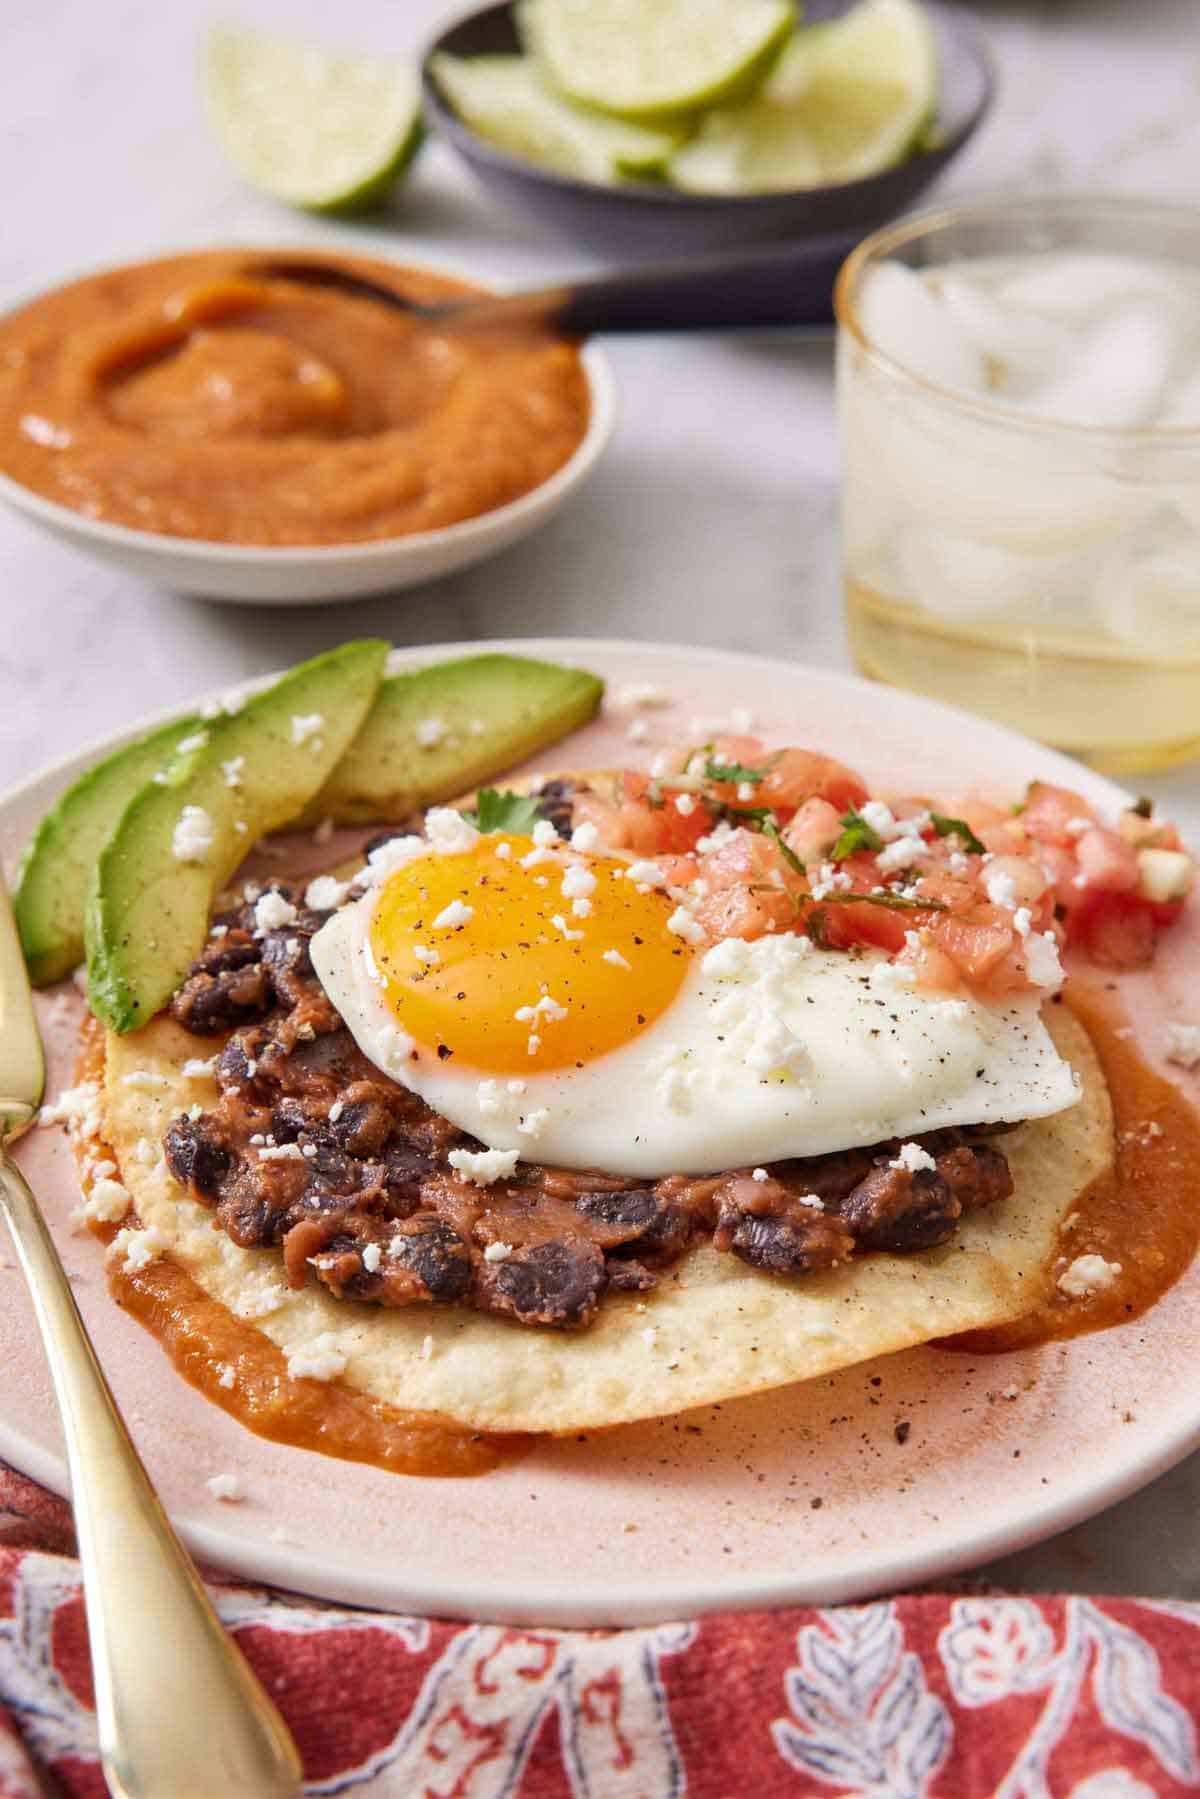 A profile view of huevos rancheros on a plate, showing the layers of sauce, tortilla, and toppings. A drink, sauce, and limes in the background.